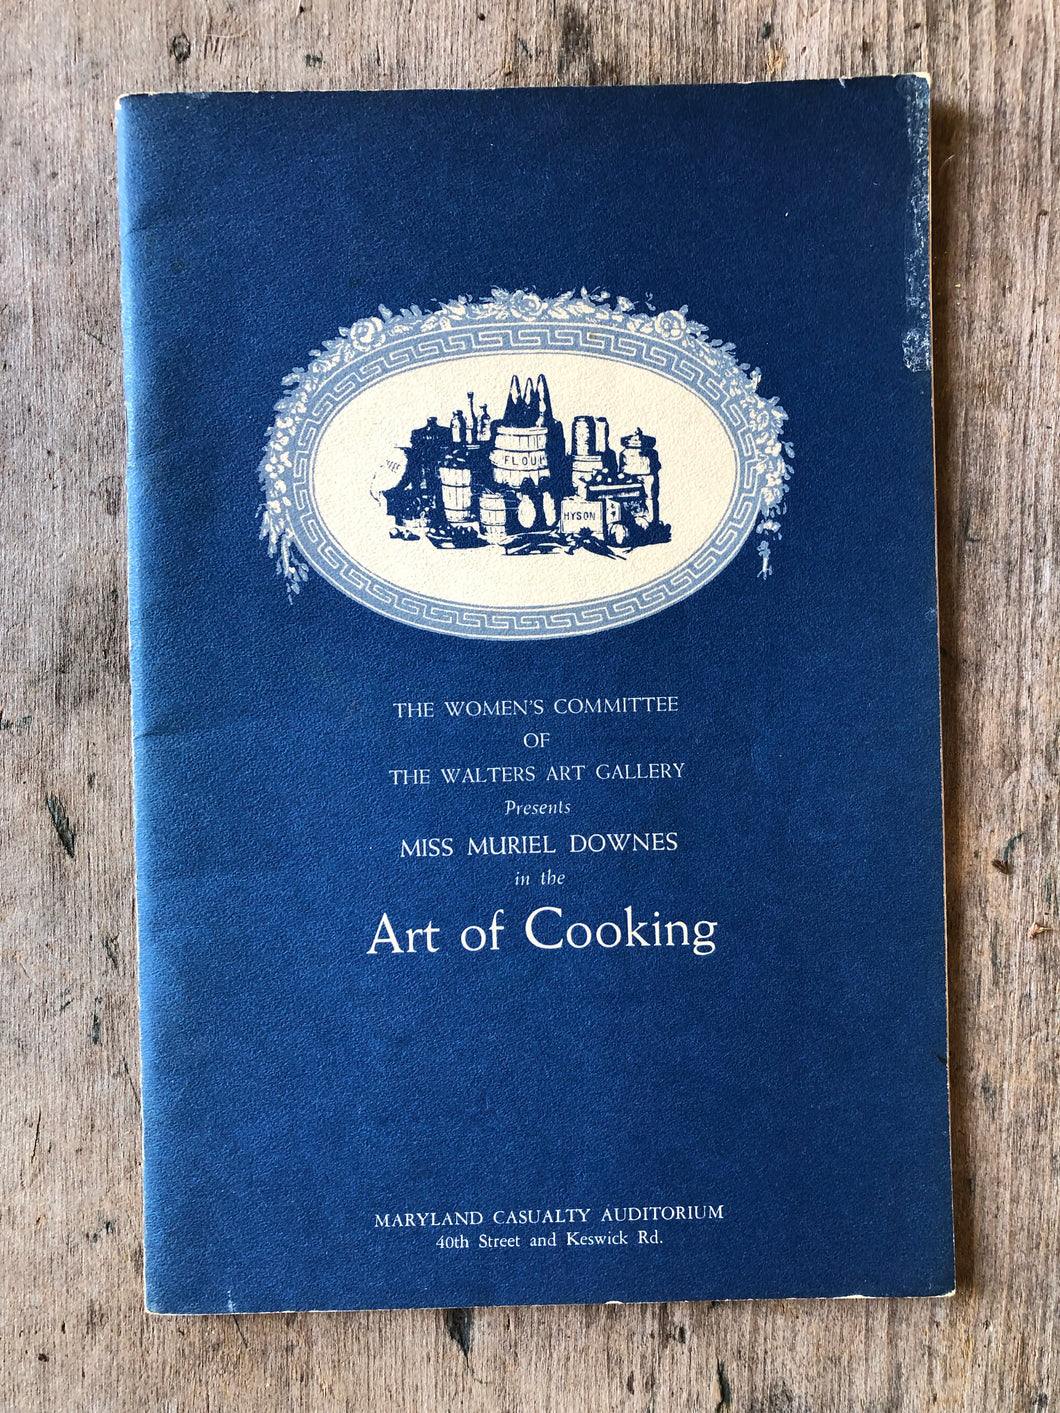 The Women’s Committee of The Walters Art Gallery Presents Miss Muriel Downes in the Art of Cooking